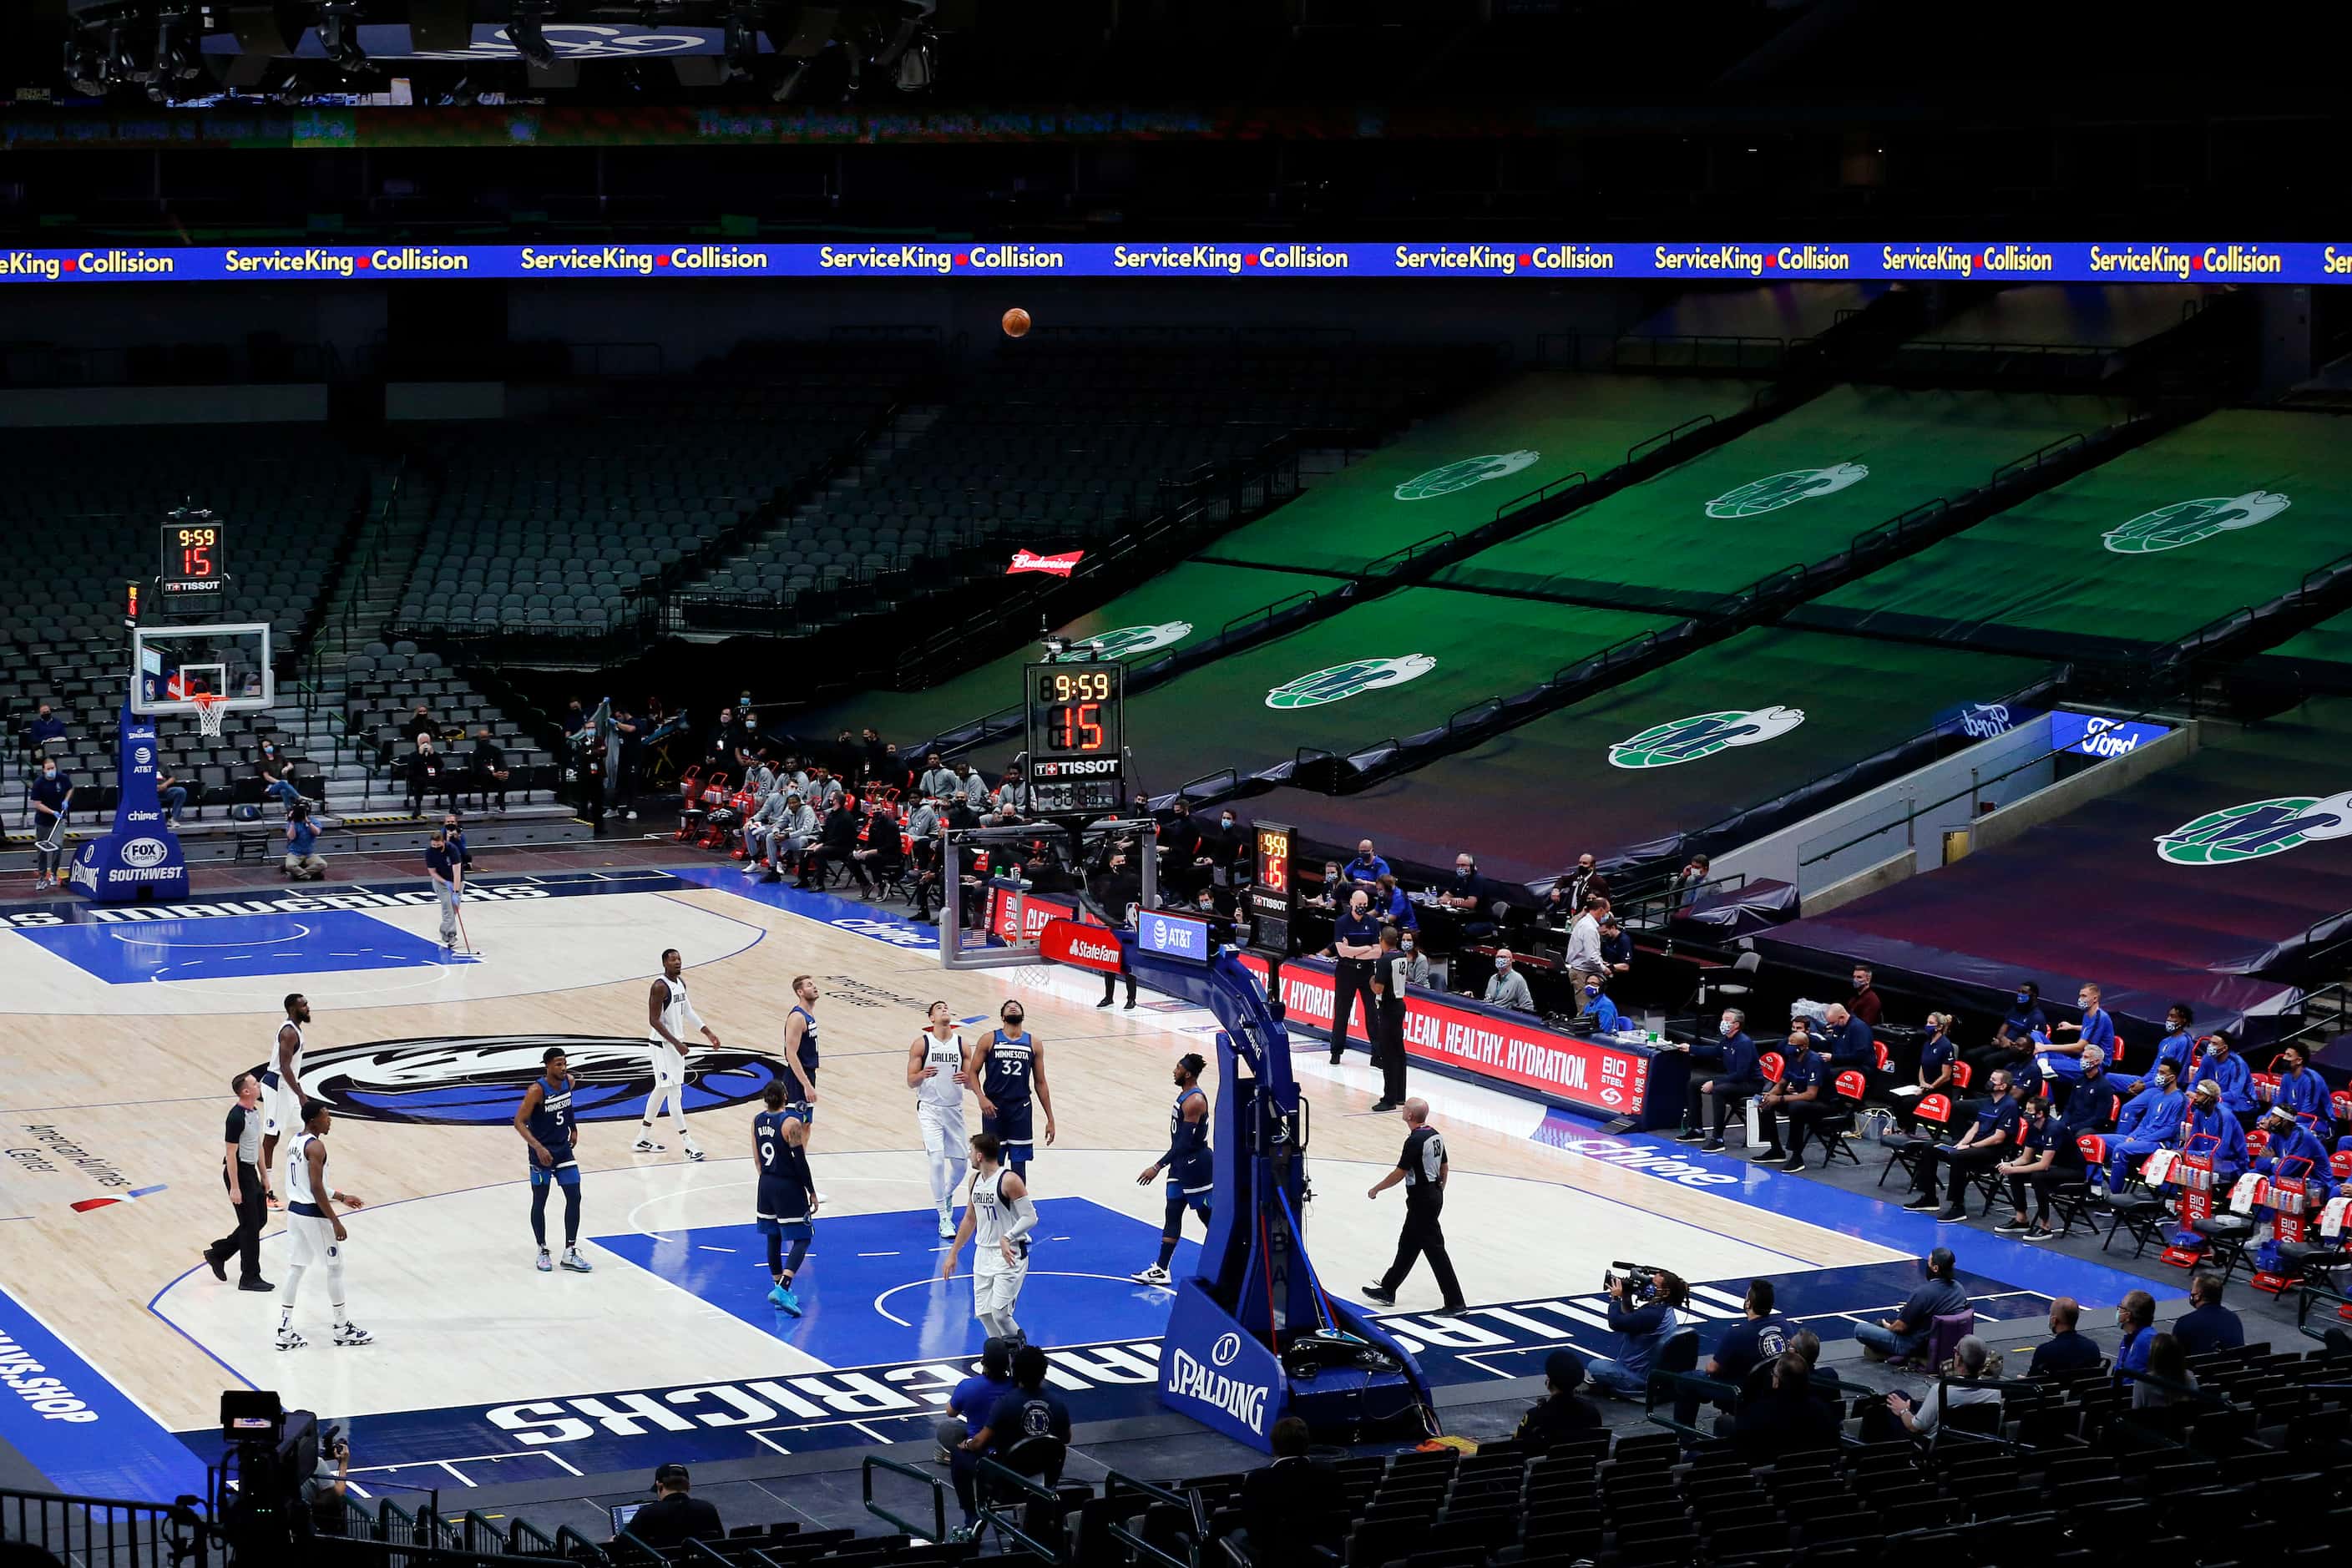 Before the empty stands of the American Airlines Center, a Dallas Mavericks player threw the...